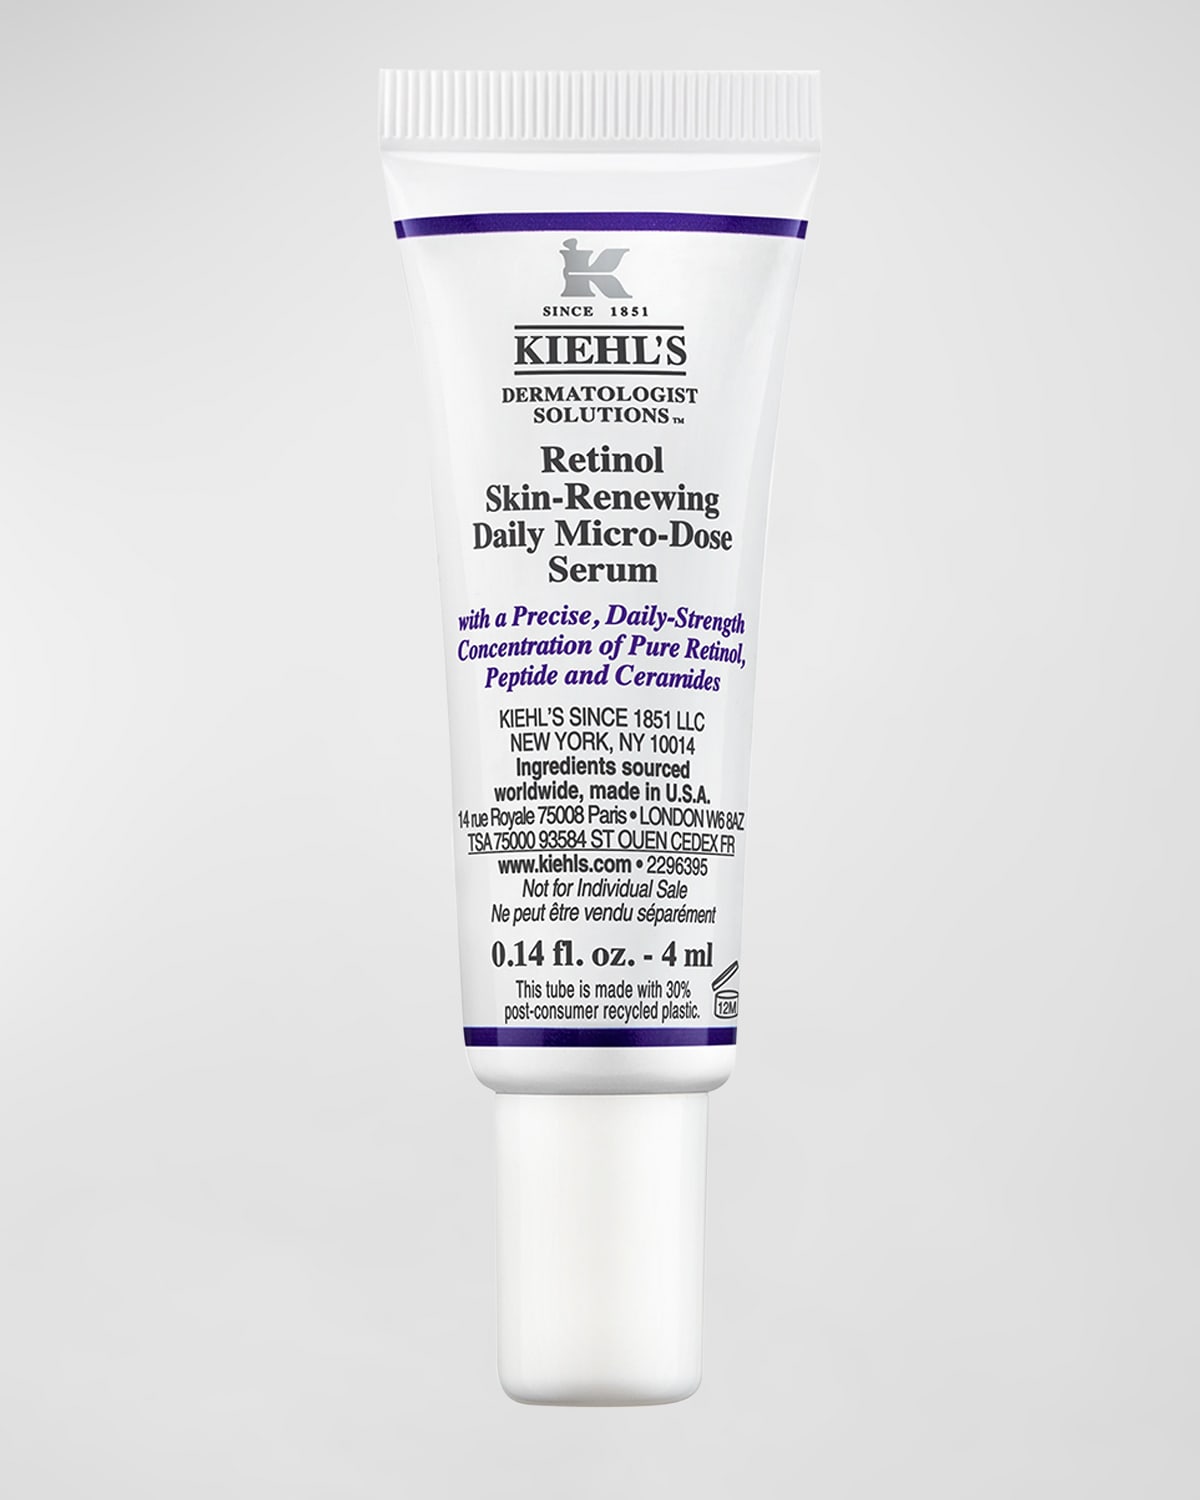 4 mL Micro-Dose Treatment, Yours with any $65 Kiehl's Since 1851 Purchase